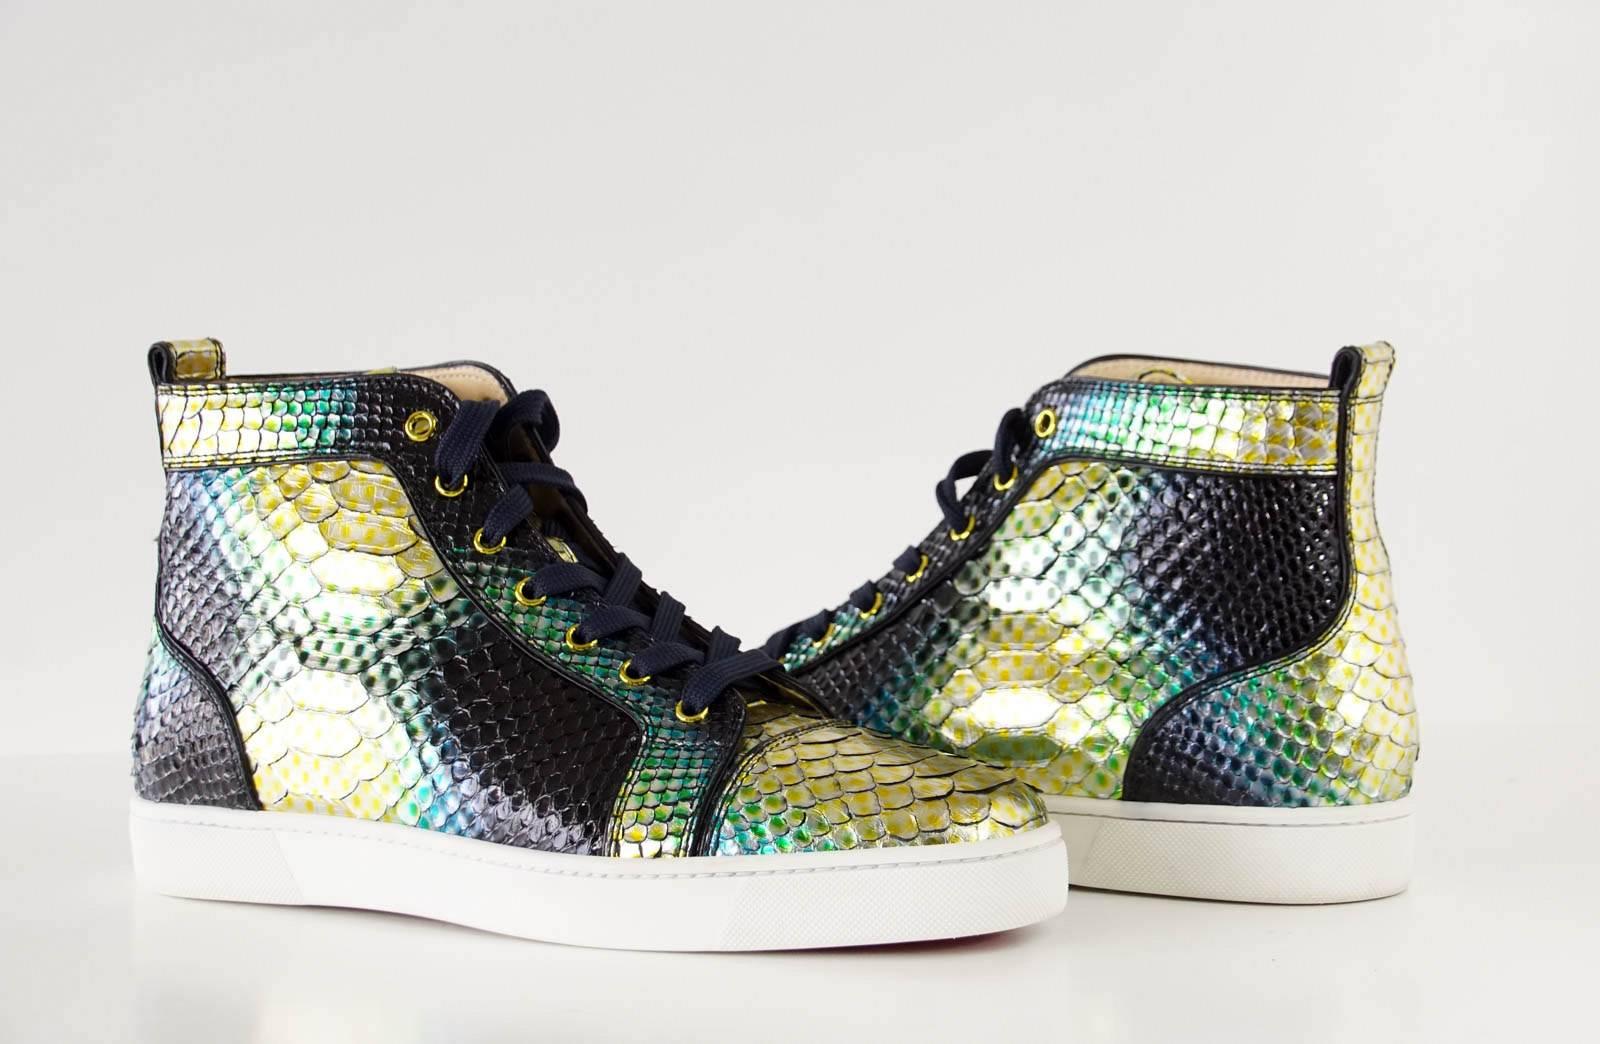 Guaranteed authentic CHRISTIAN LOUBOUTIN men's flat snakeskin sneaker.
Fabulous snakeskin mimosa aquarium in gold, green, blue and black.
Logo plaque on side of shoe.
Comes with box and sleeper.
NEW or NEVER WORN. 
final sale

SIZE 44.5
USA SIZE